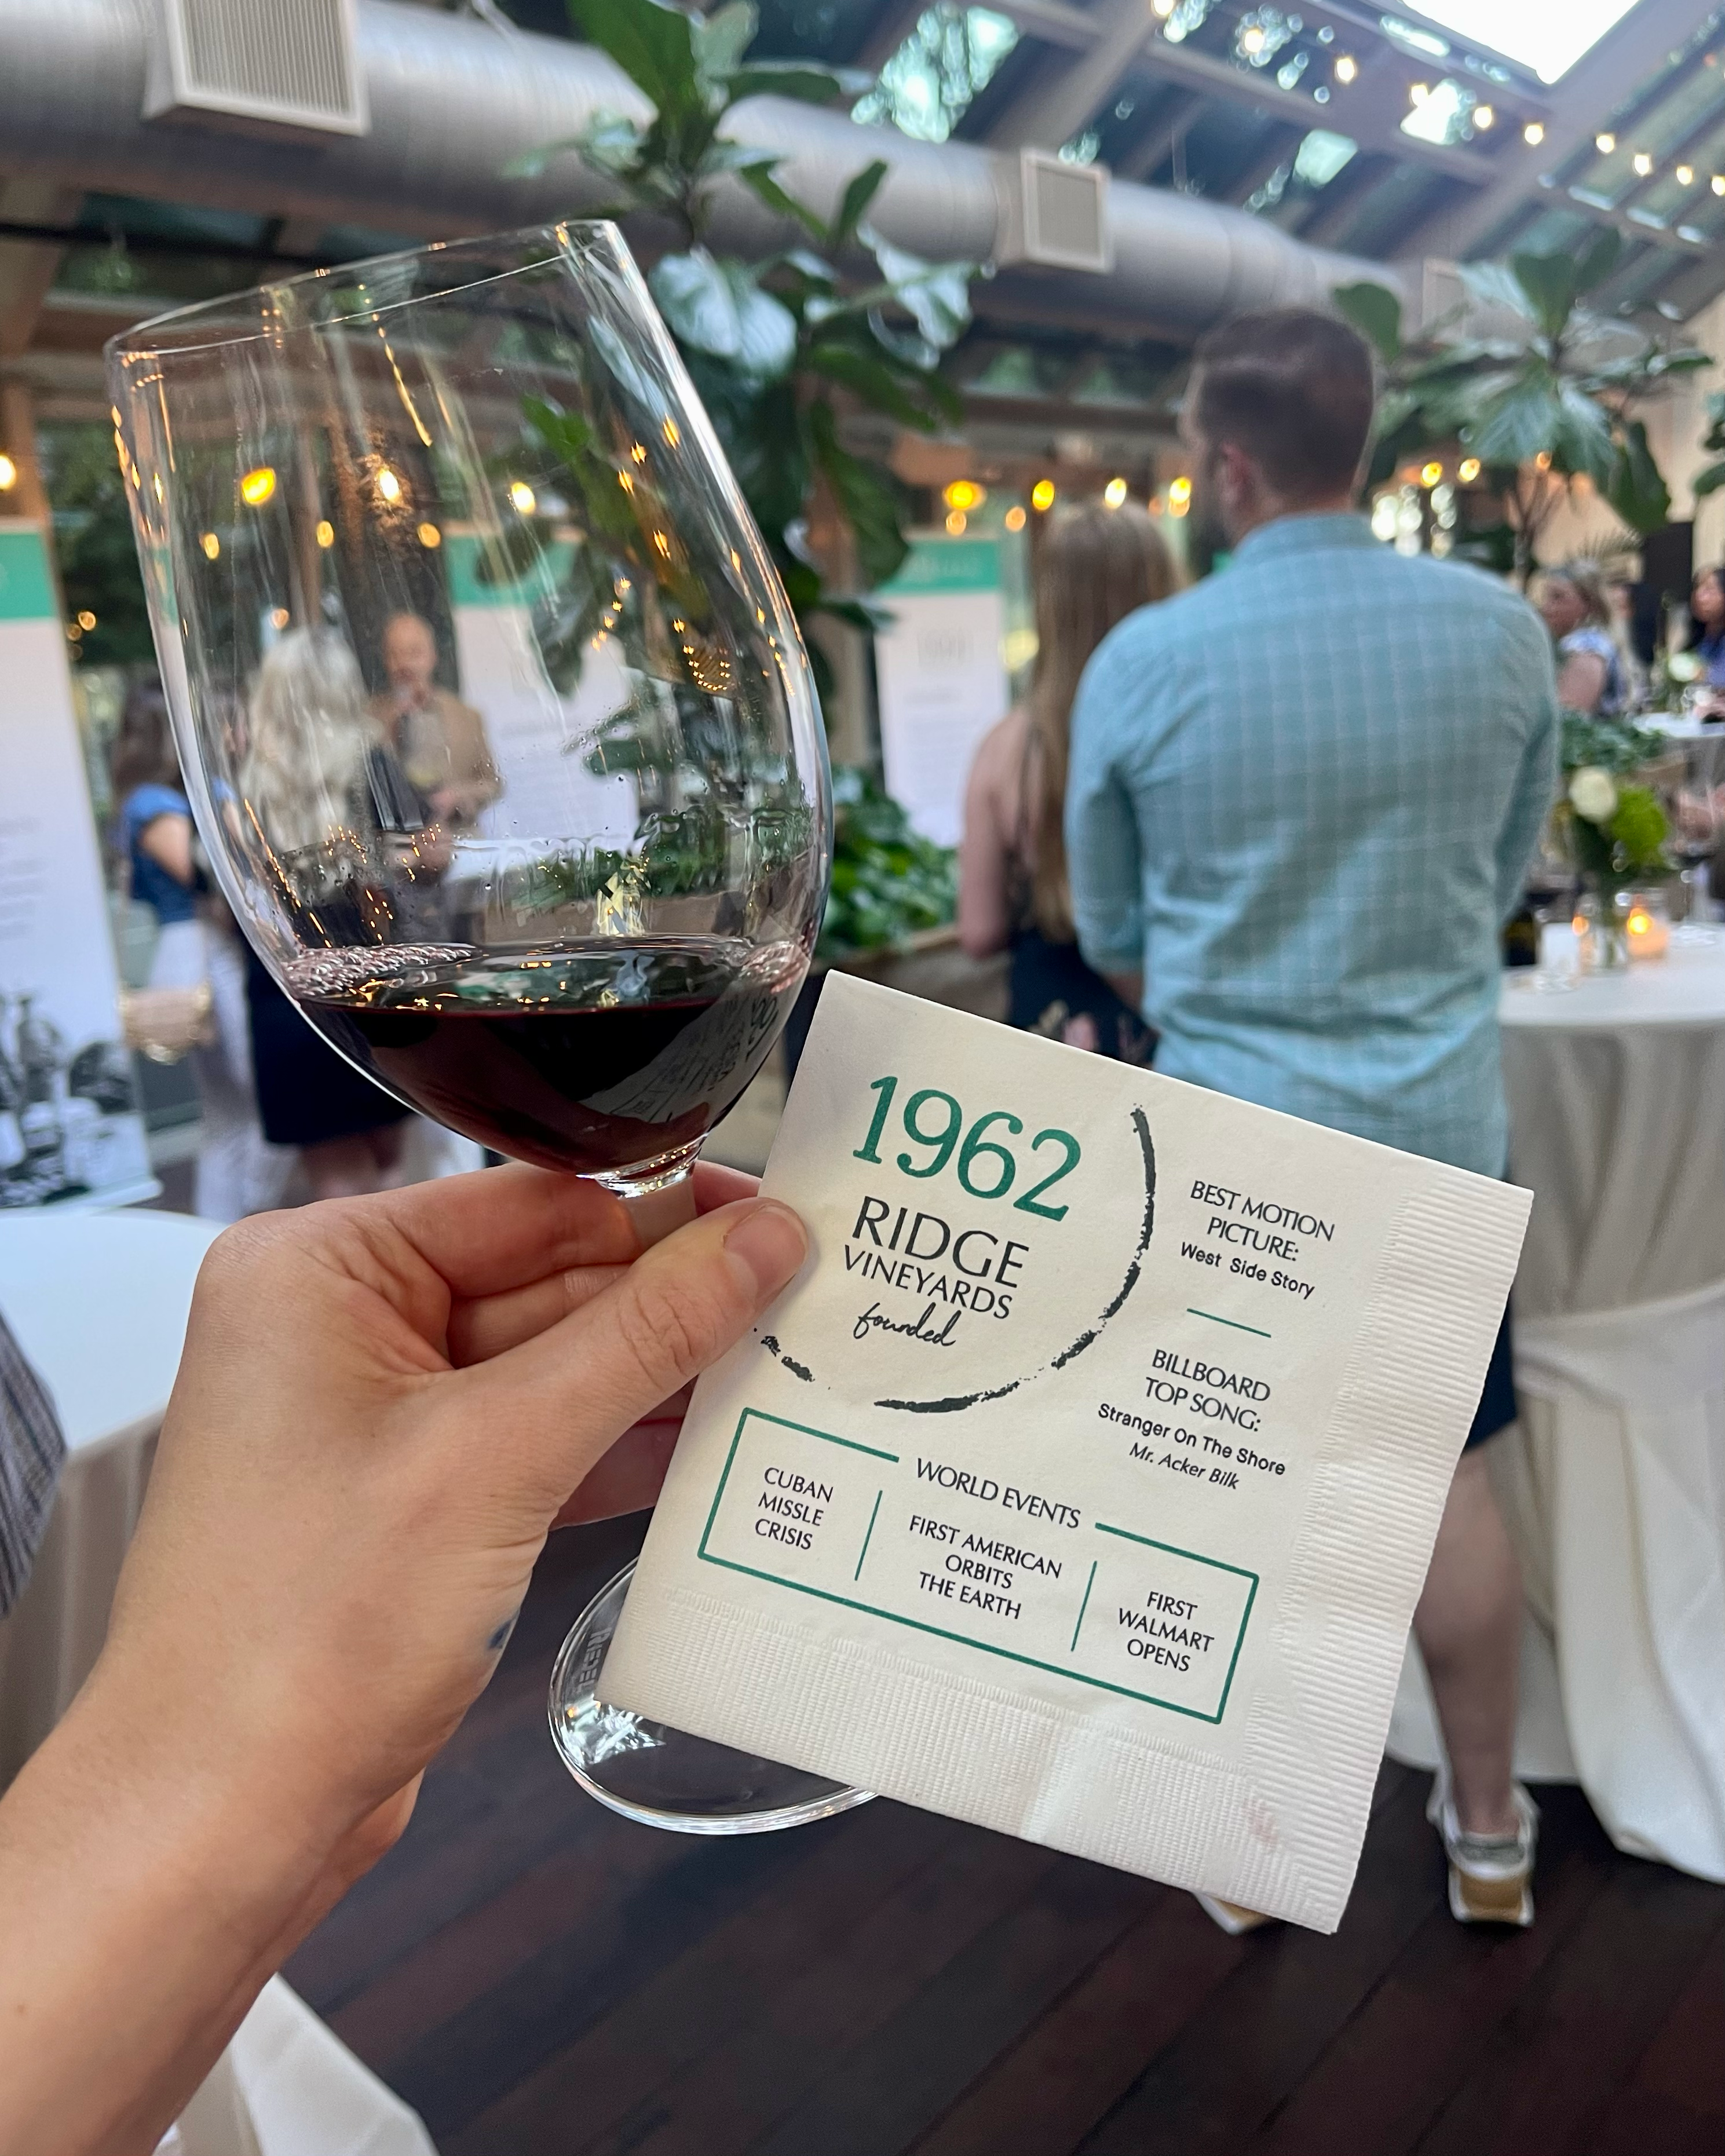 In a busy room, a hand holds a glass of red wine in front of the camera. It also holds a napkin embossed with “1962 Ridge Vineyards,” and a list of notable events from that year.